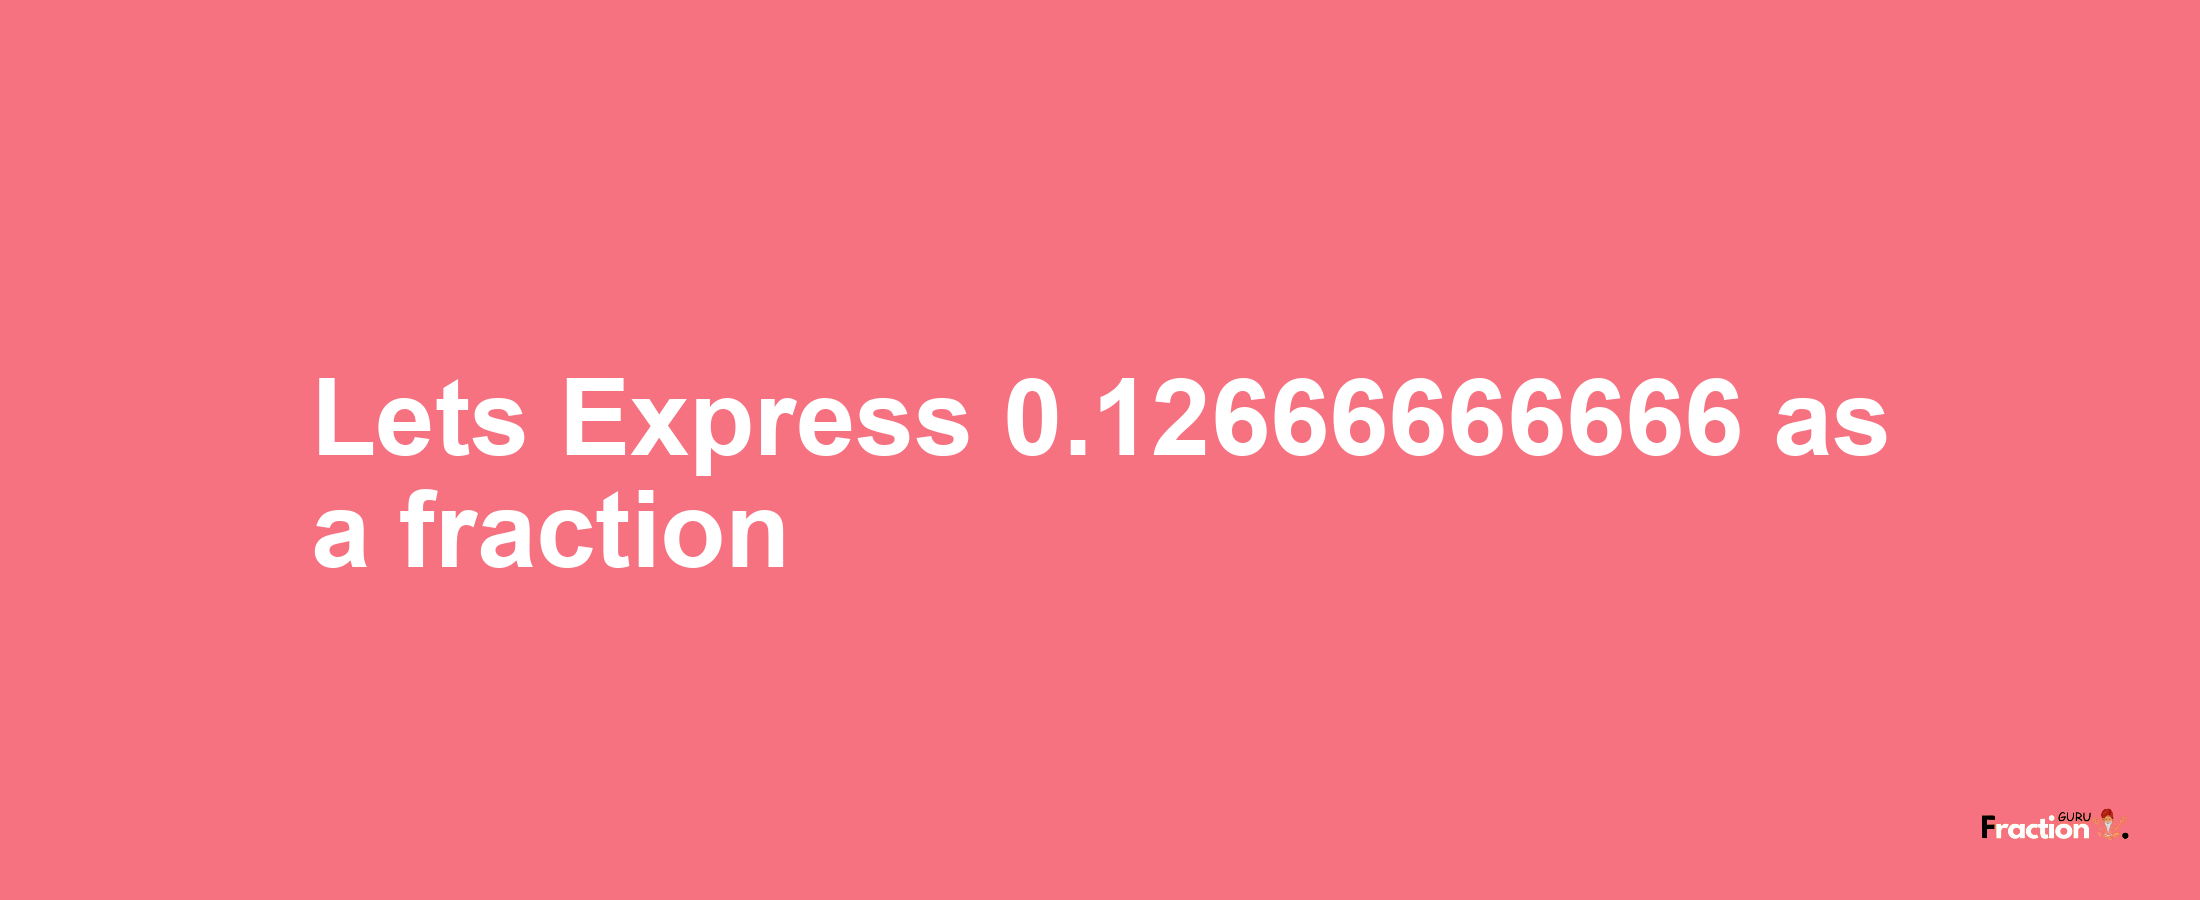 Lets Express 0.12666666666 as afraction